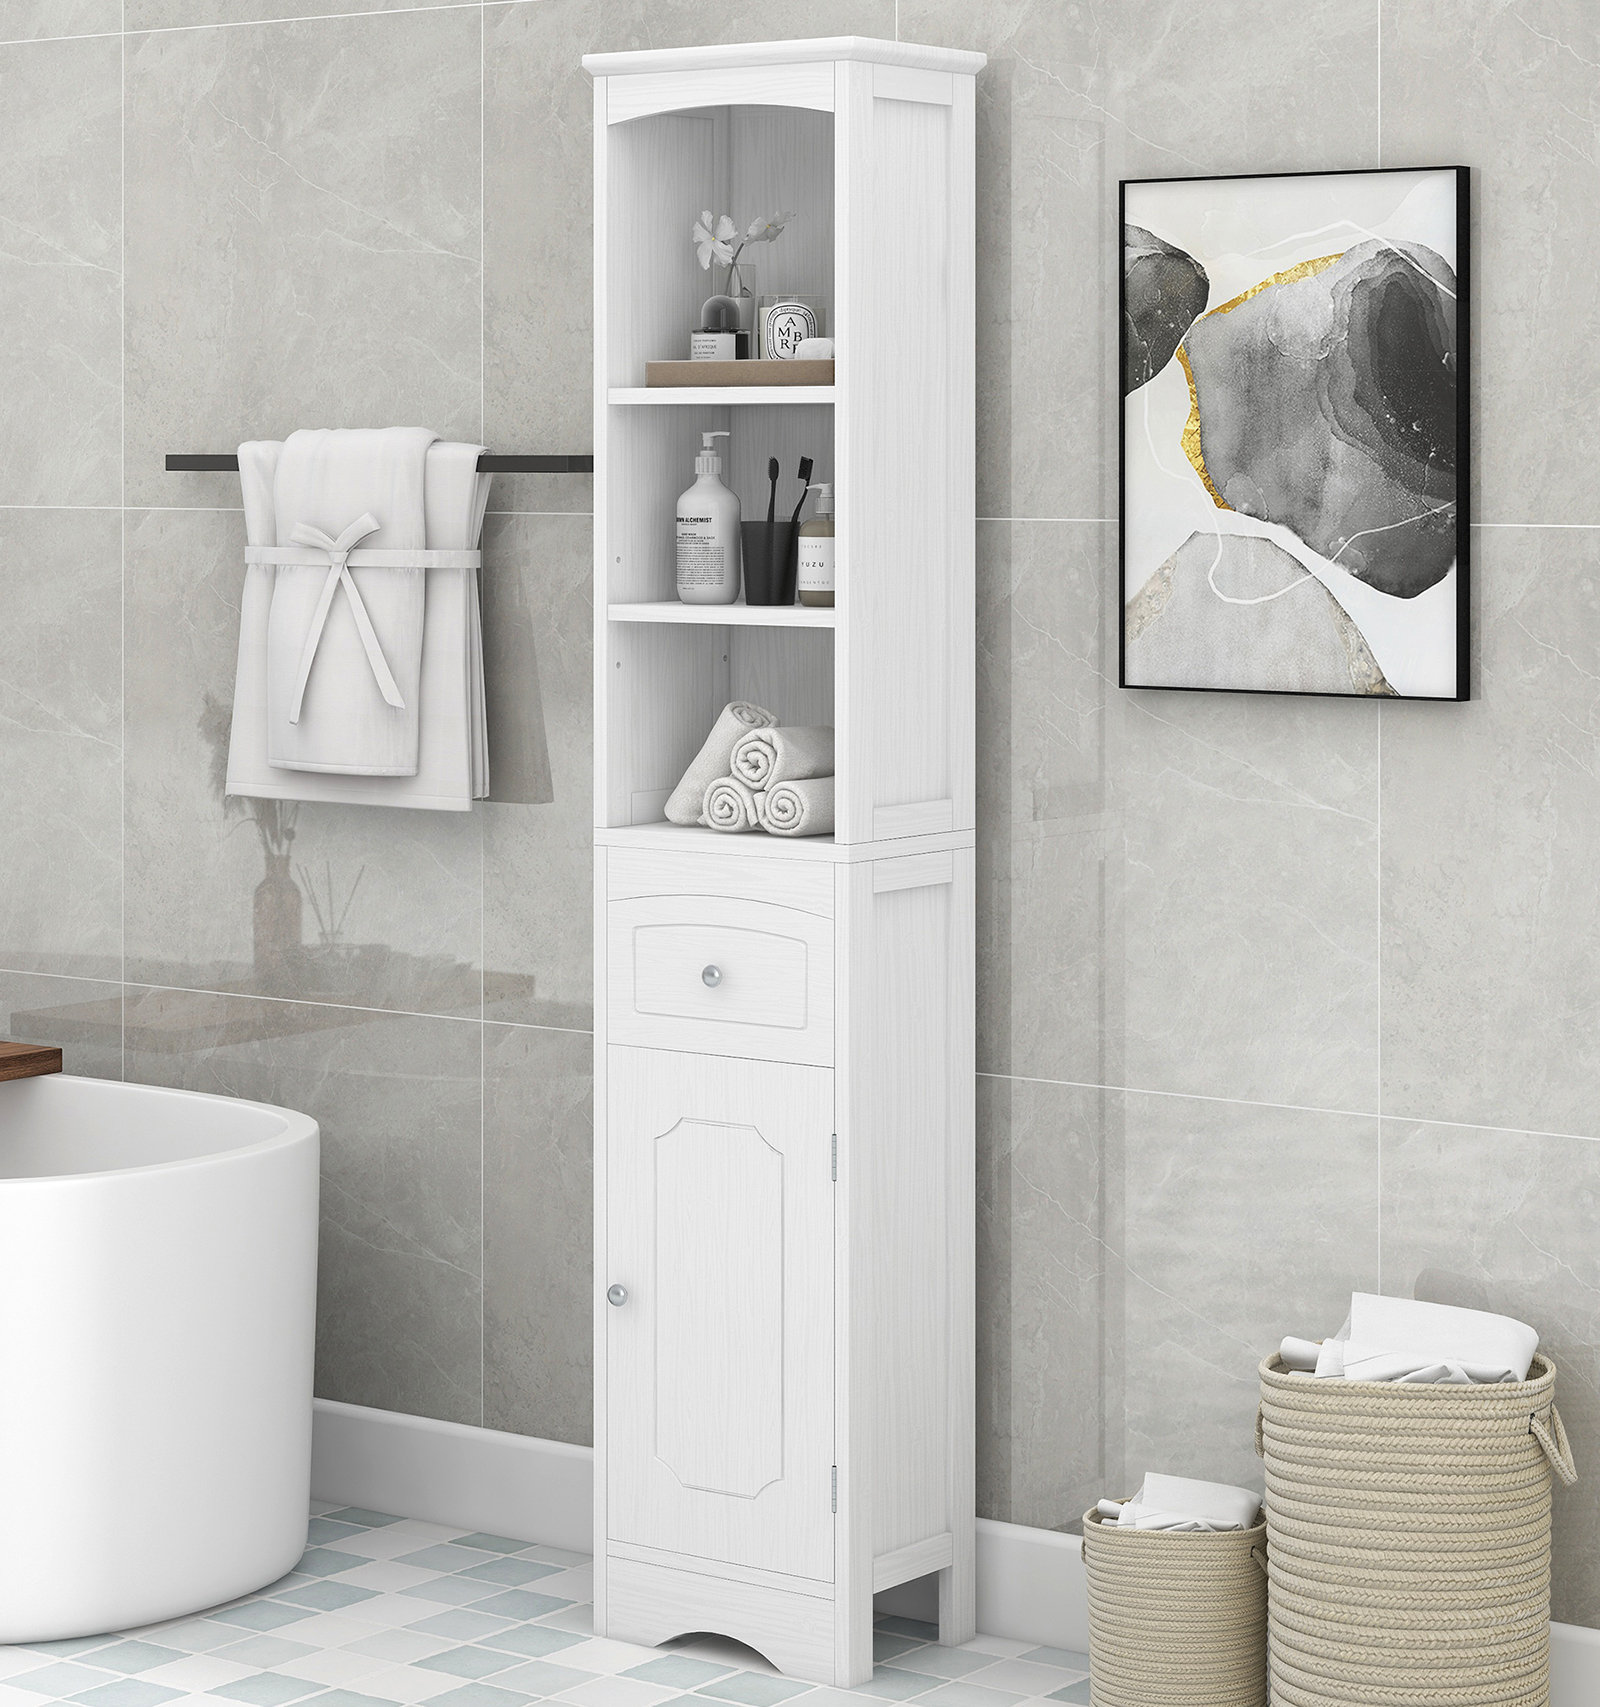 Bathroom Freestanding Storage Cabinet with Two Tier Open Shelves, with Door and Drawer Free Standing Linen Tower (White) Winston Porter Finish: White